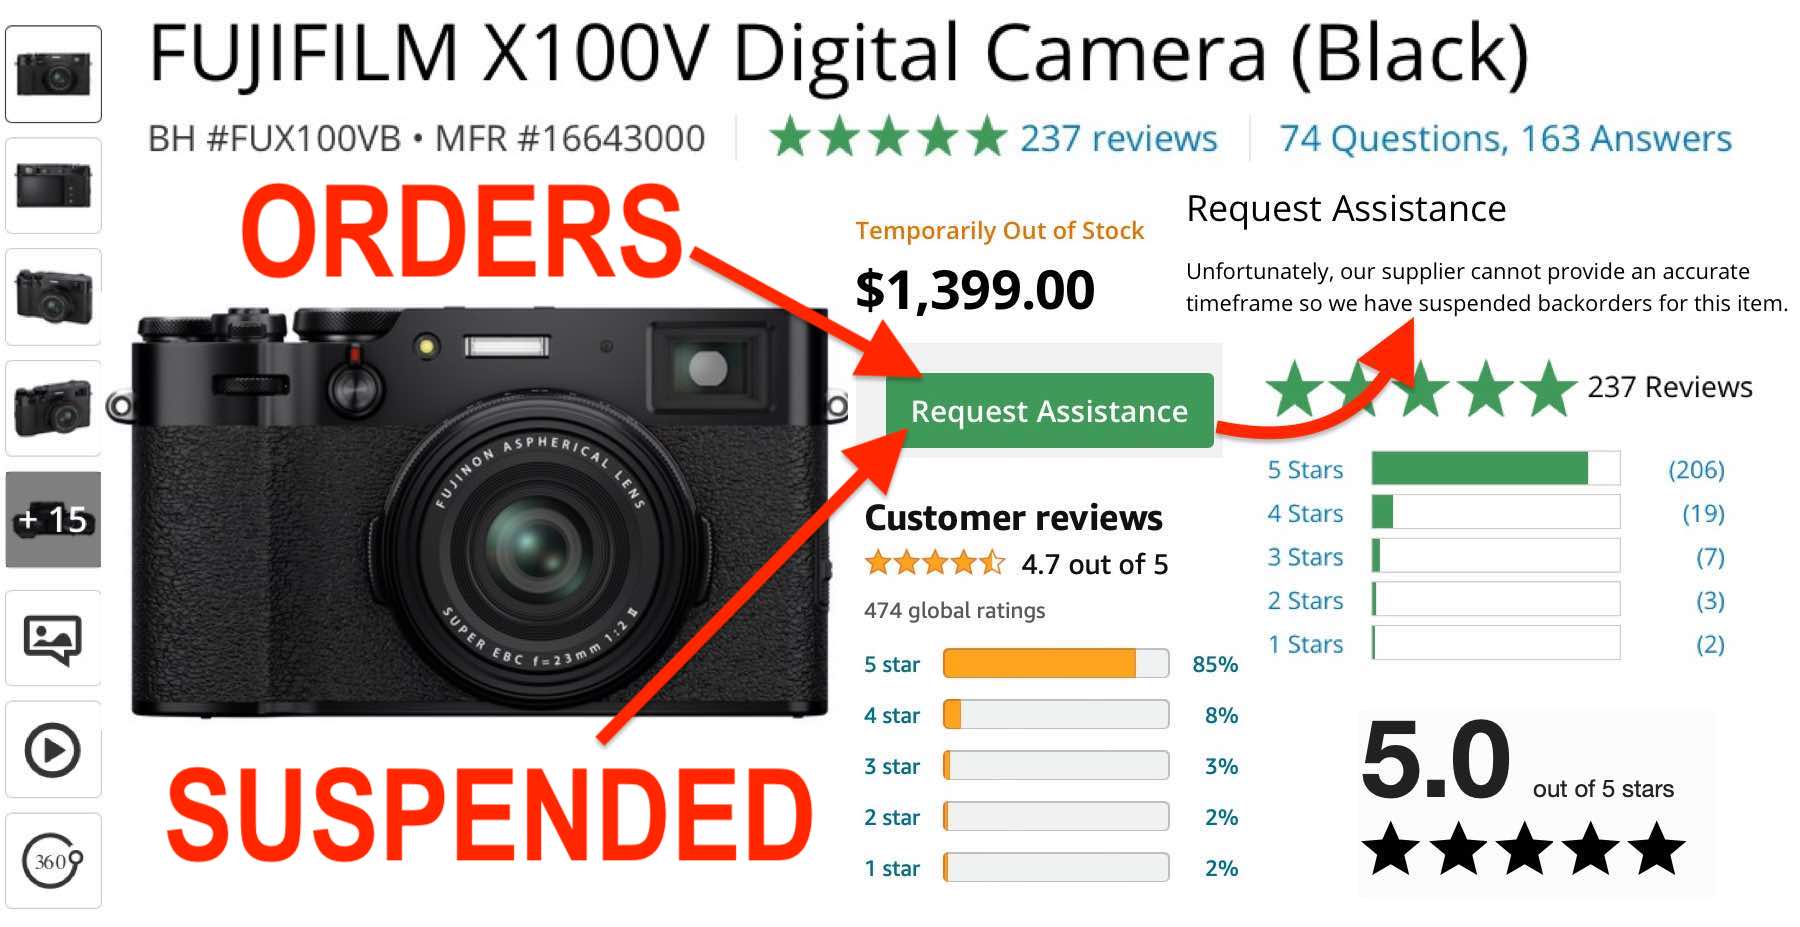 3 Ways the Fuji X100 Changed the Camera Industry Forever